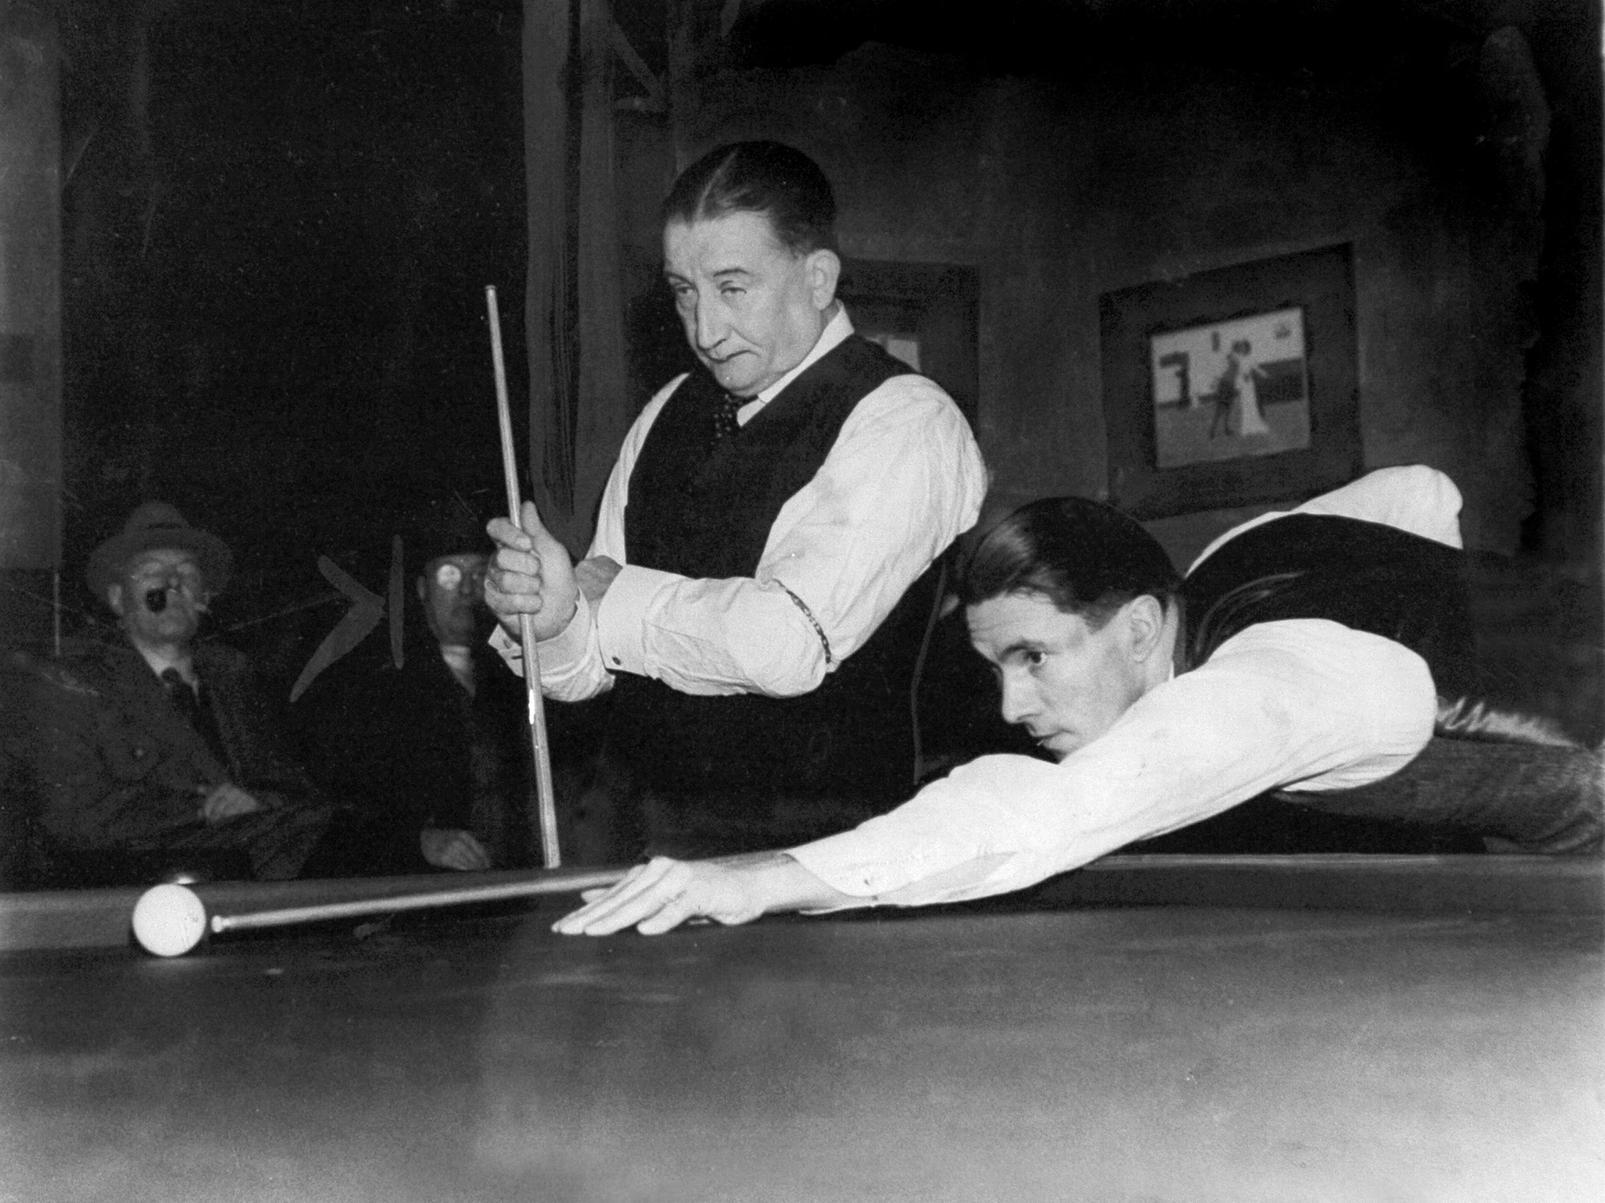 Famous billiards player Melbourne Inman watches his opponent, Sydney Smith, making a break in the Gold Cup sealed handicap billiard competition in Leeds.